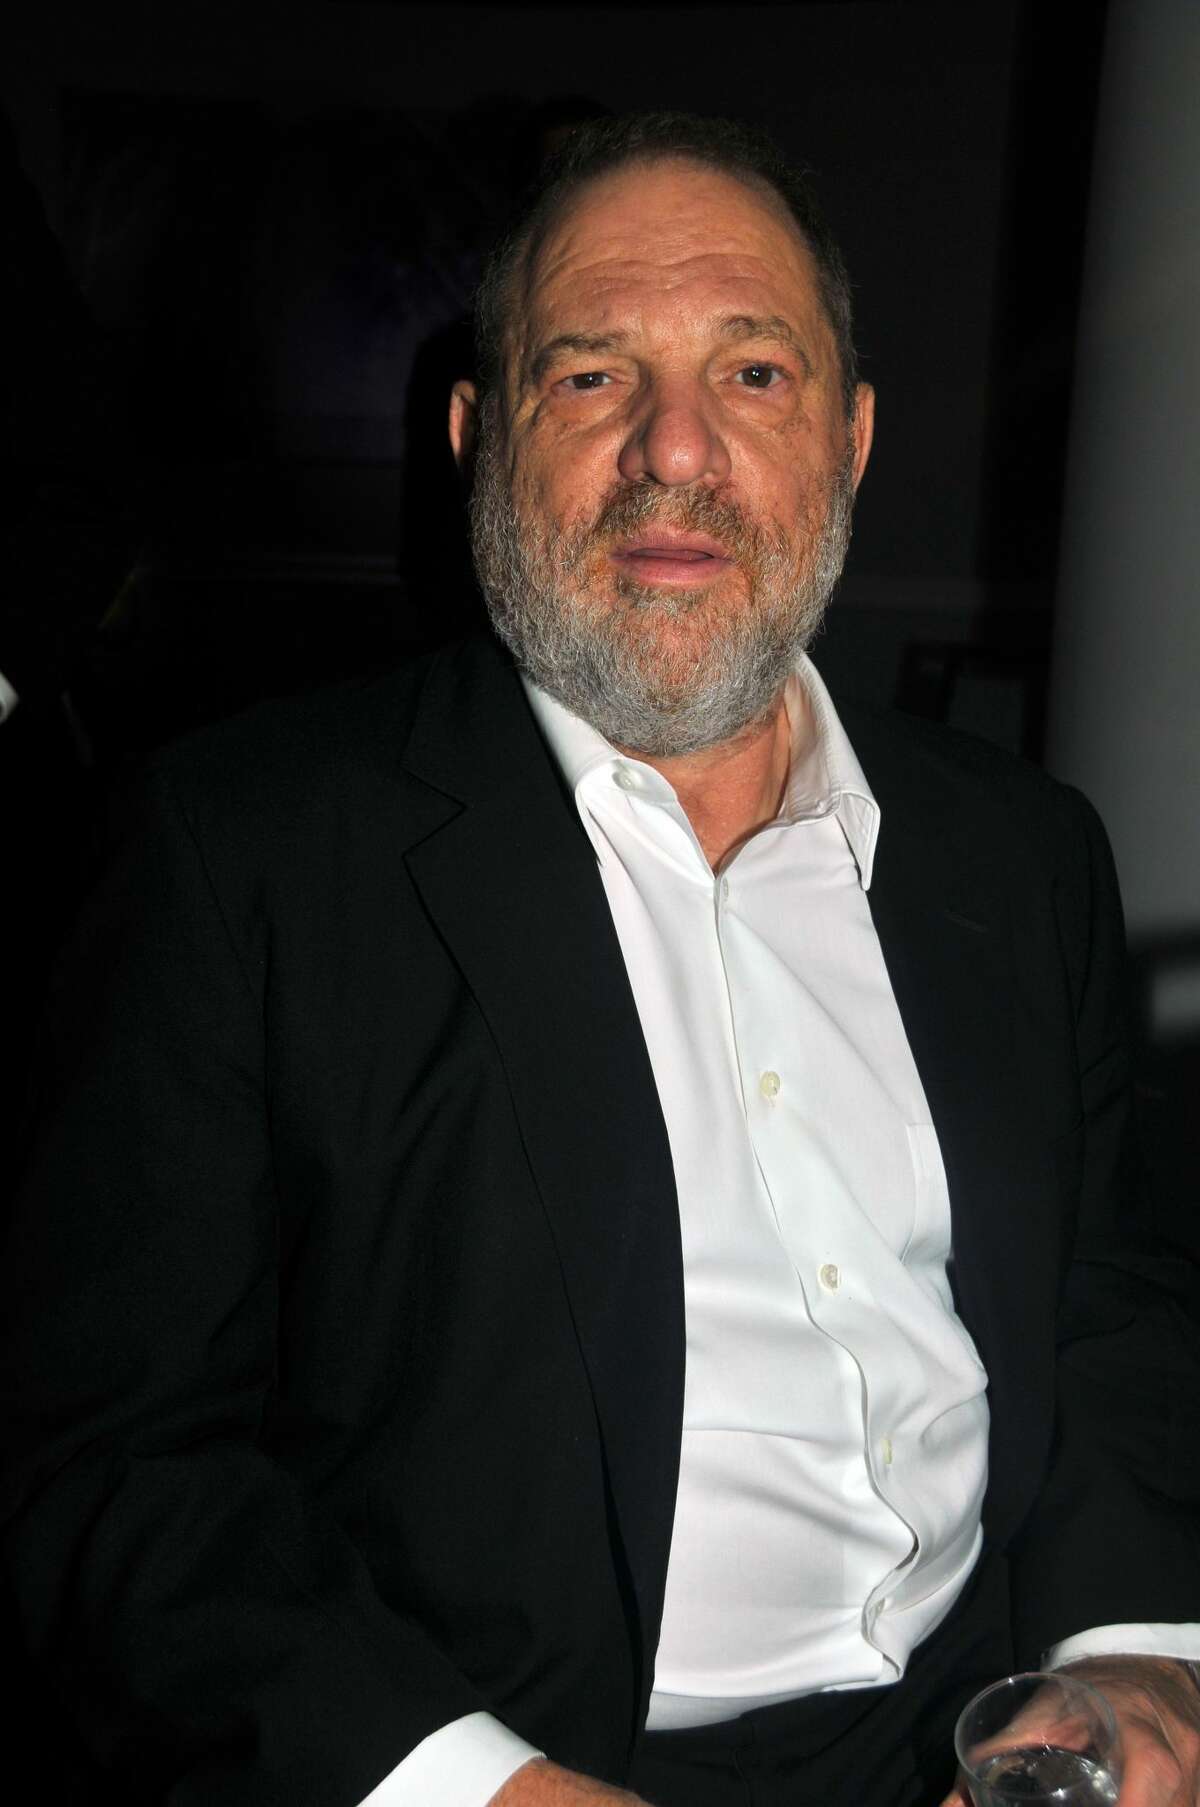 Who:  Harvey Weinstein, film producer At his best: Producer of films like "Pulp Fiction" and "Shakespeare in Love" (which won seven Academy Awards in 1998); recipient of Producers Guild of America's Milestone Award At his worst: More than two dozen actresses, models, and entertainment industry professionals have accused Weinstein of sexual harassment and assault; including actress Rose McGowan, Ashley Judd, and Gwyneth Paltrow. Repercussions: Weinsten was fired from his own production company, his wife Georgina Chapman announced she was divorcing him, the Academy of Motion Picture Arts and Sciences, which awards the Oscars, kicked him out, and now the Weinstein Co. is reportedly up for sale.